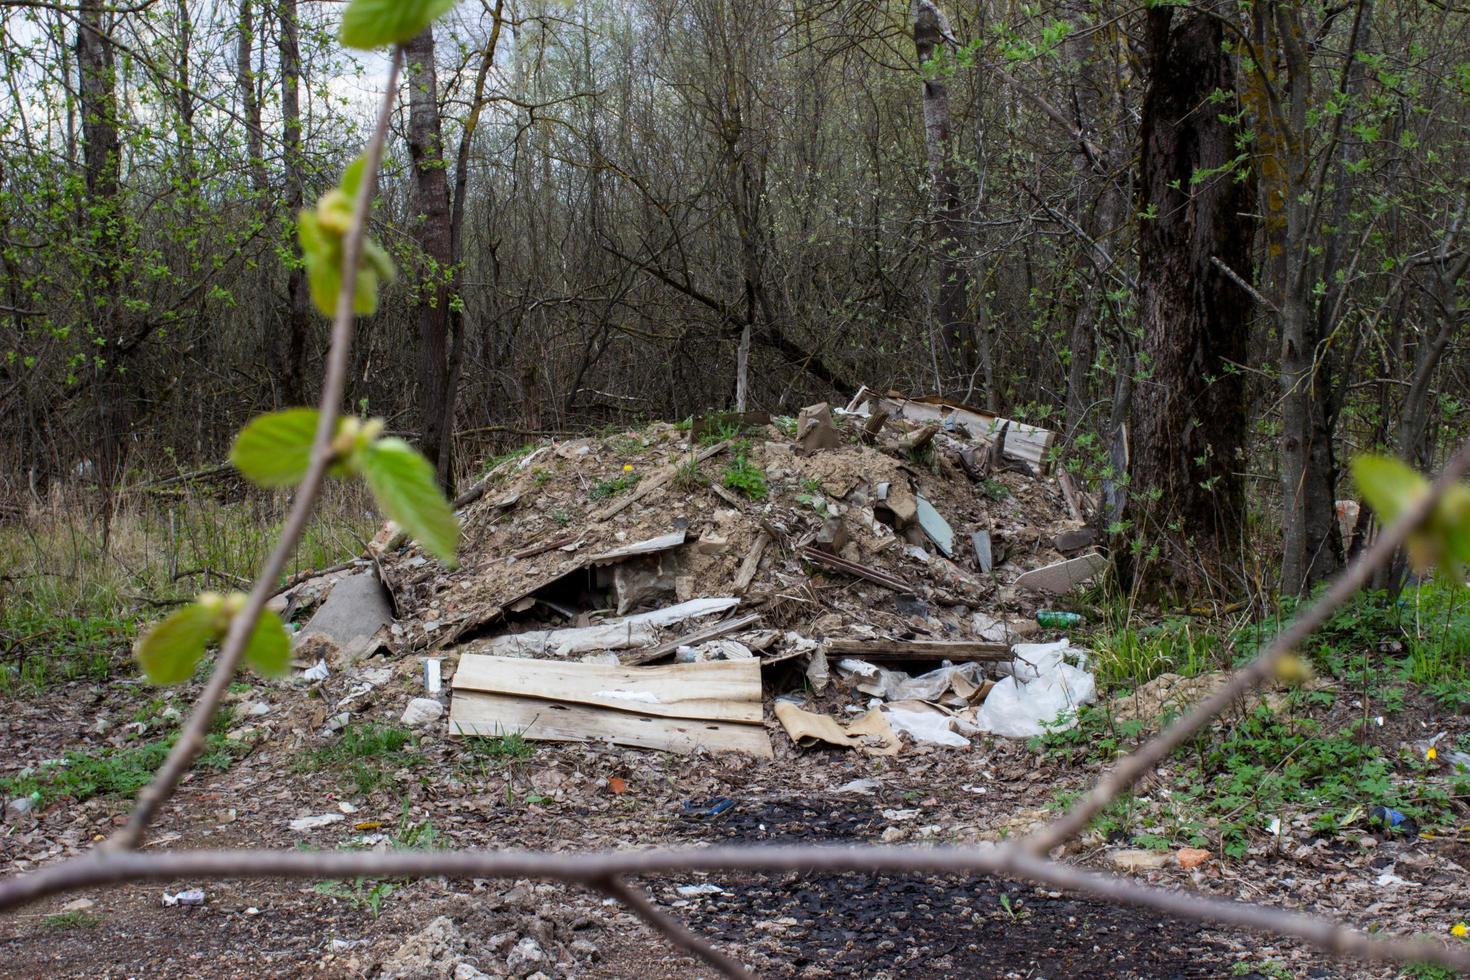 Garbage dump in the forest near the road photo